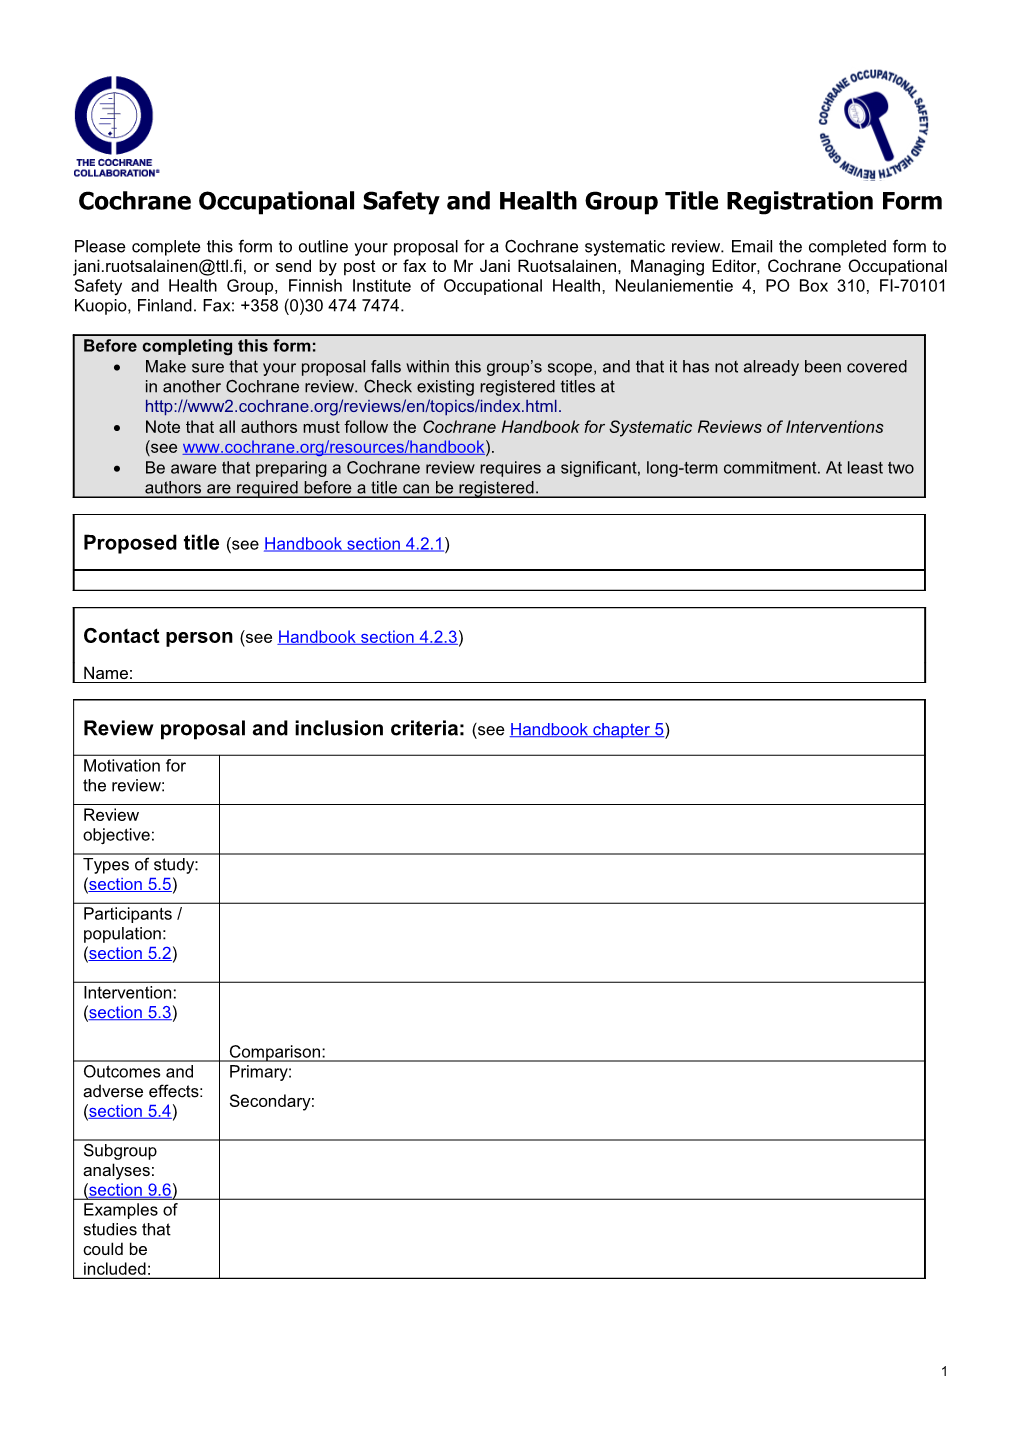 Cochrane Occupational Safety and Health Group Title Registration Form